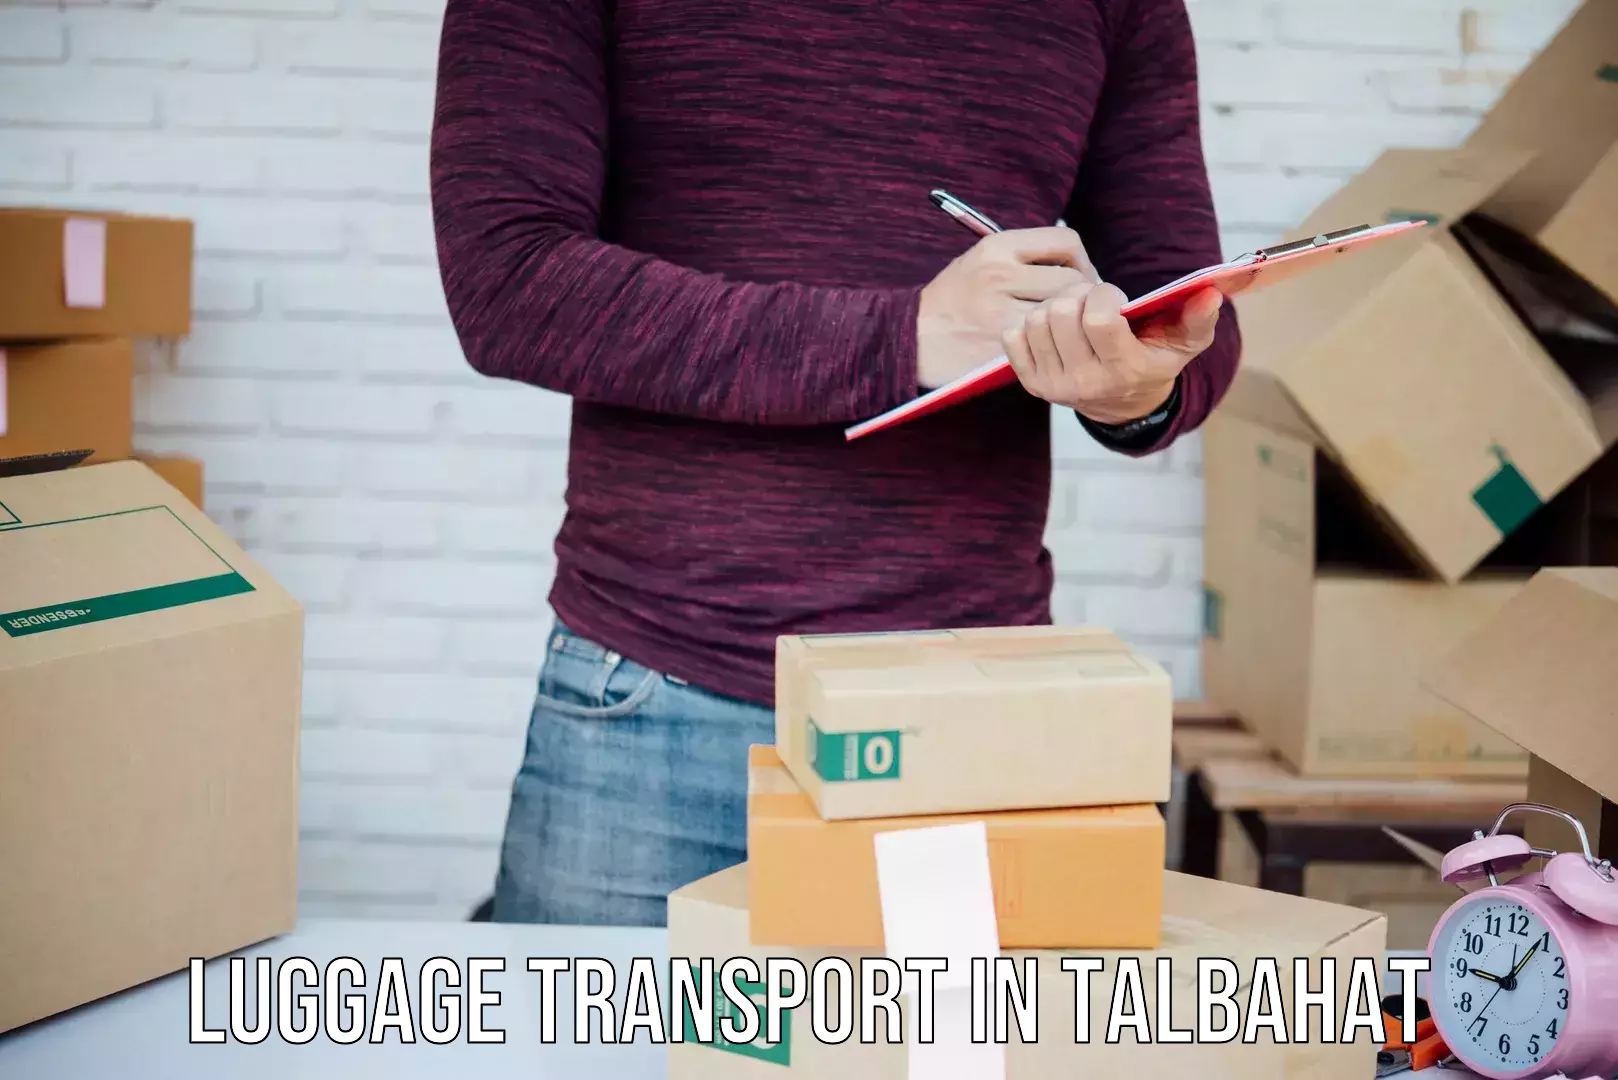 Luggage transport tips in Talbahat